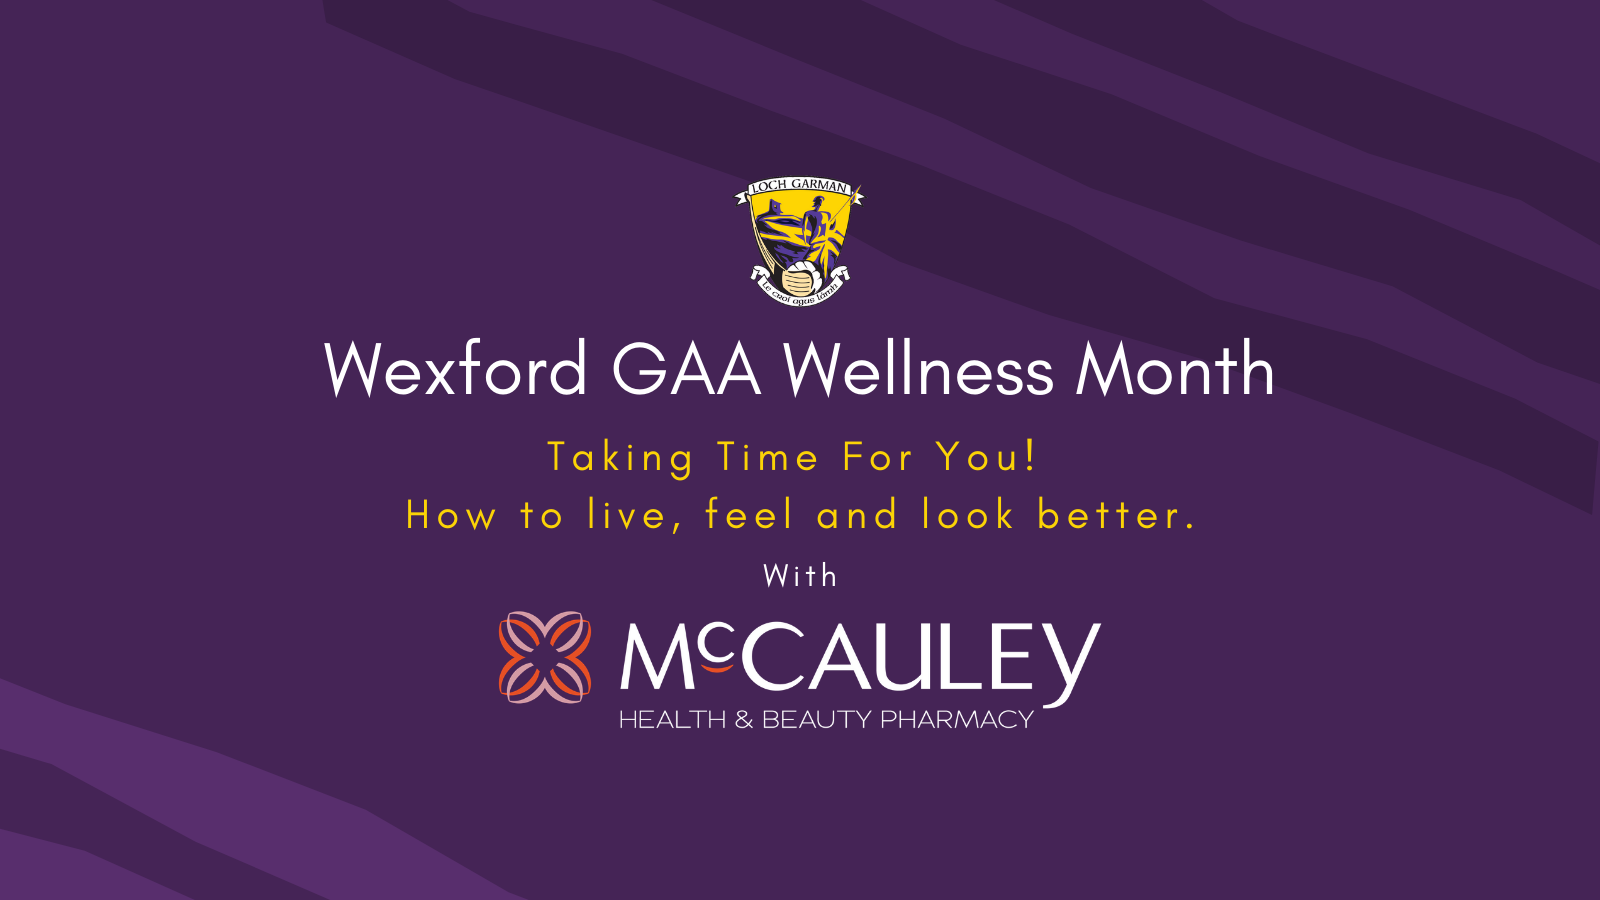 Taking Time For You! How to live, feel and look better with McCauley Pharmacy